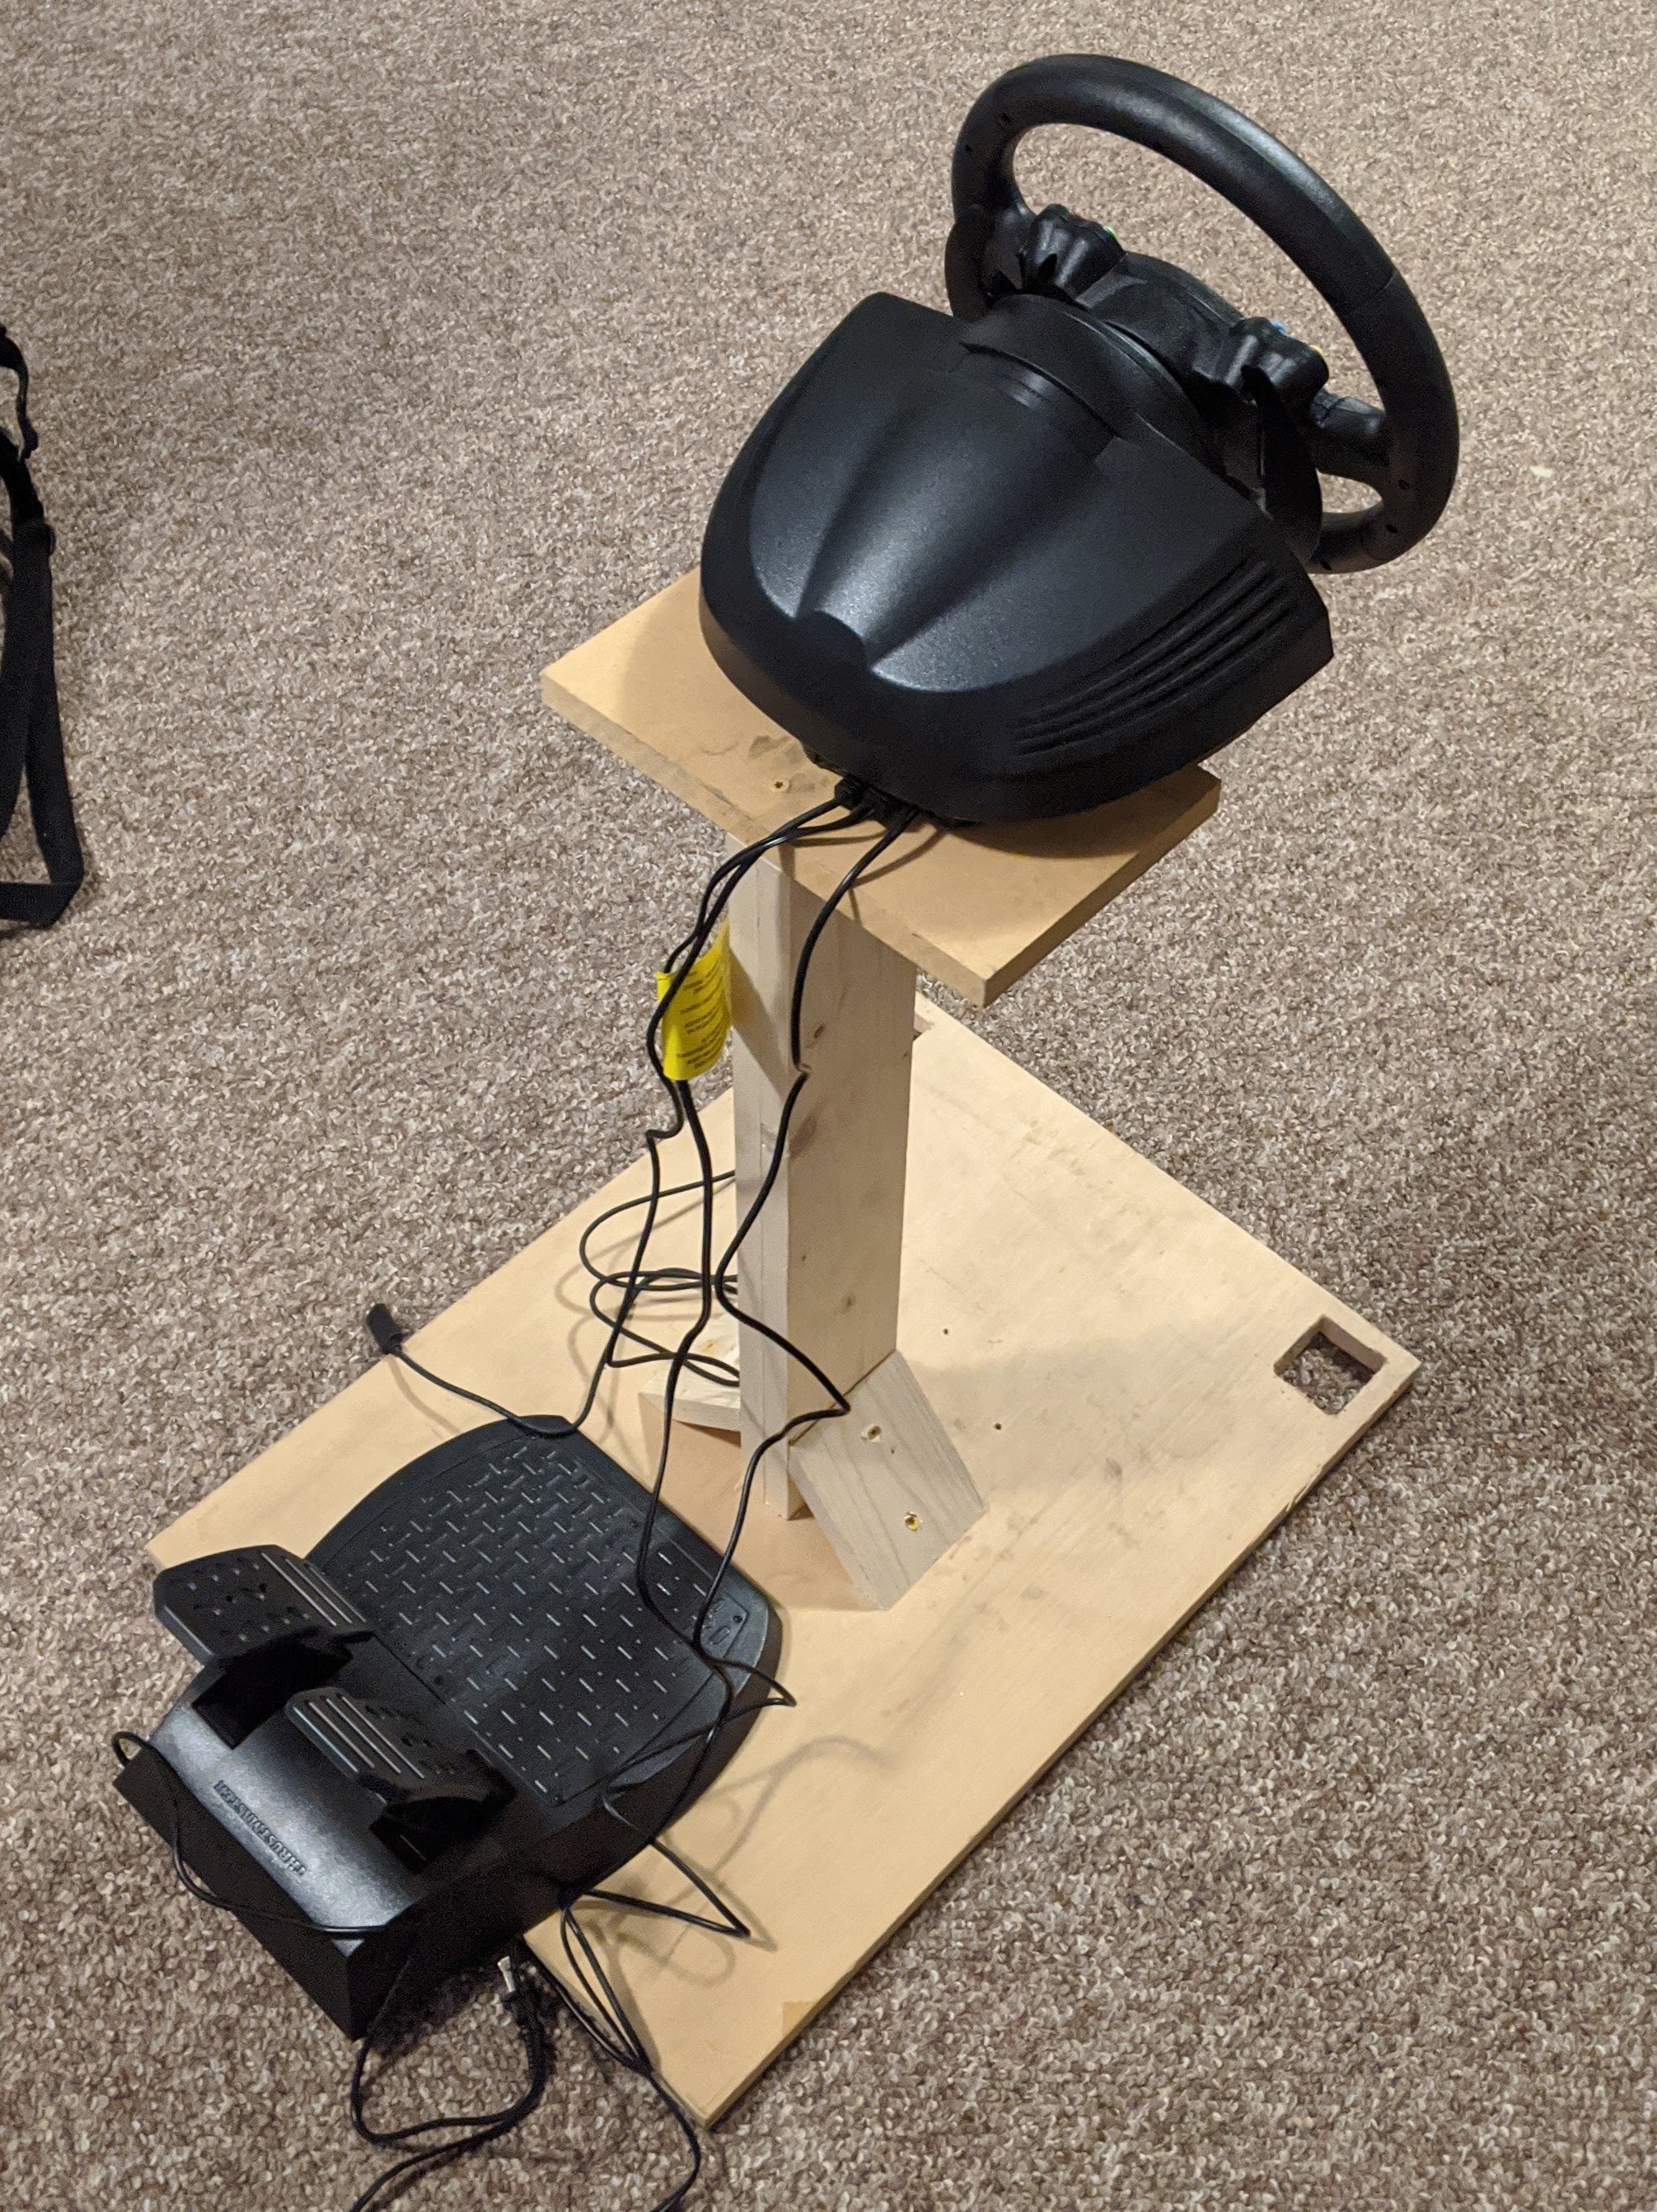 Race gaming rig with wheel and pedals on a wooden stand